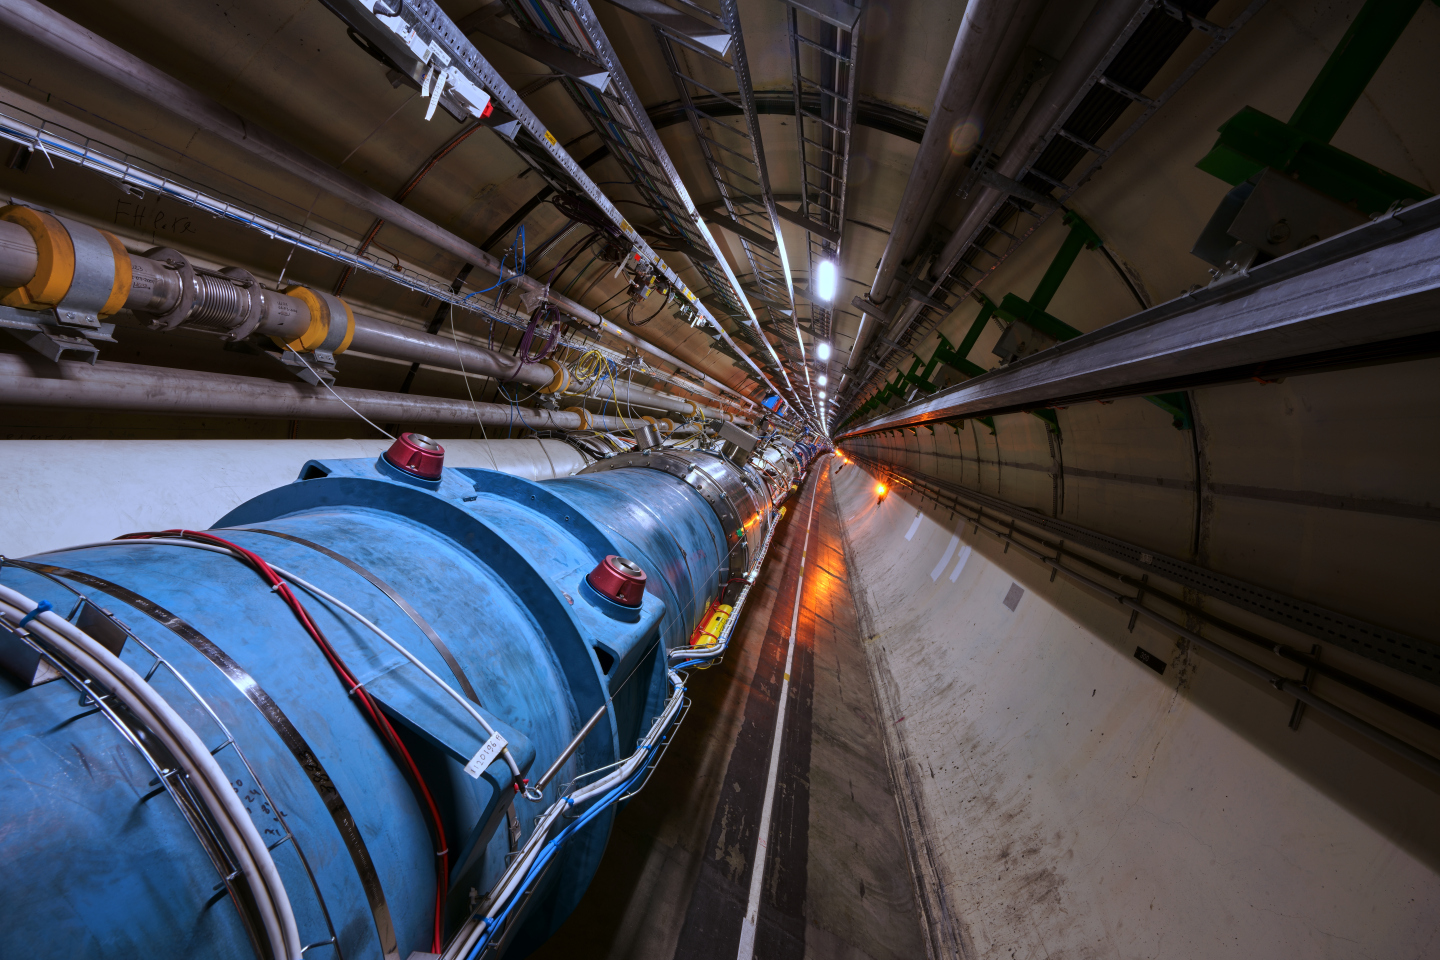 The Large Hadron Collider is about to turn back on after a 3year